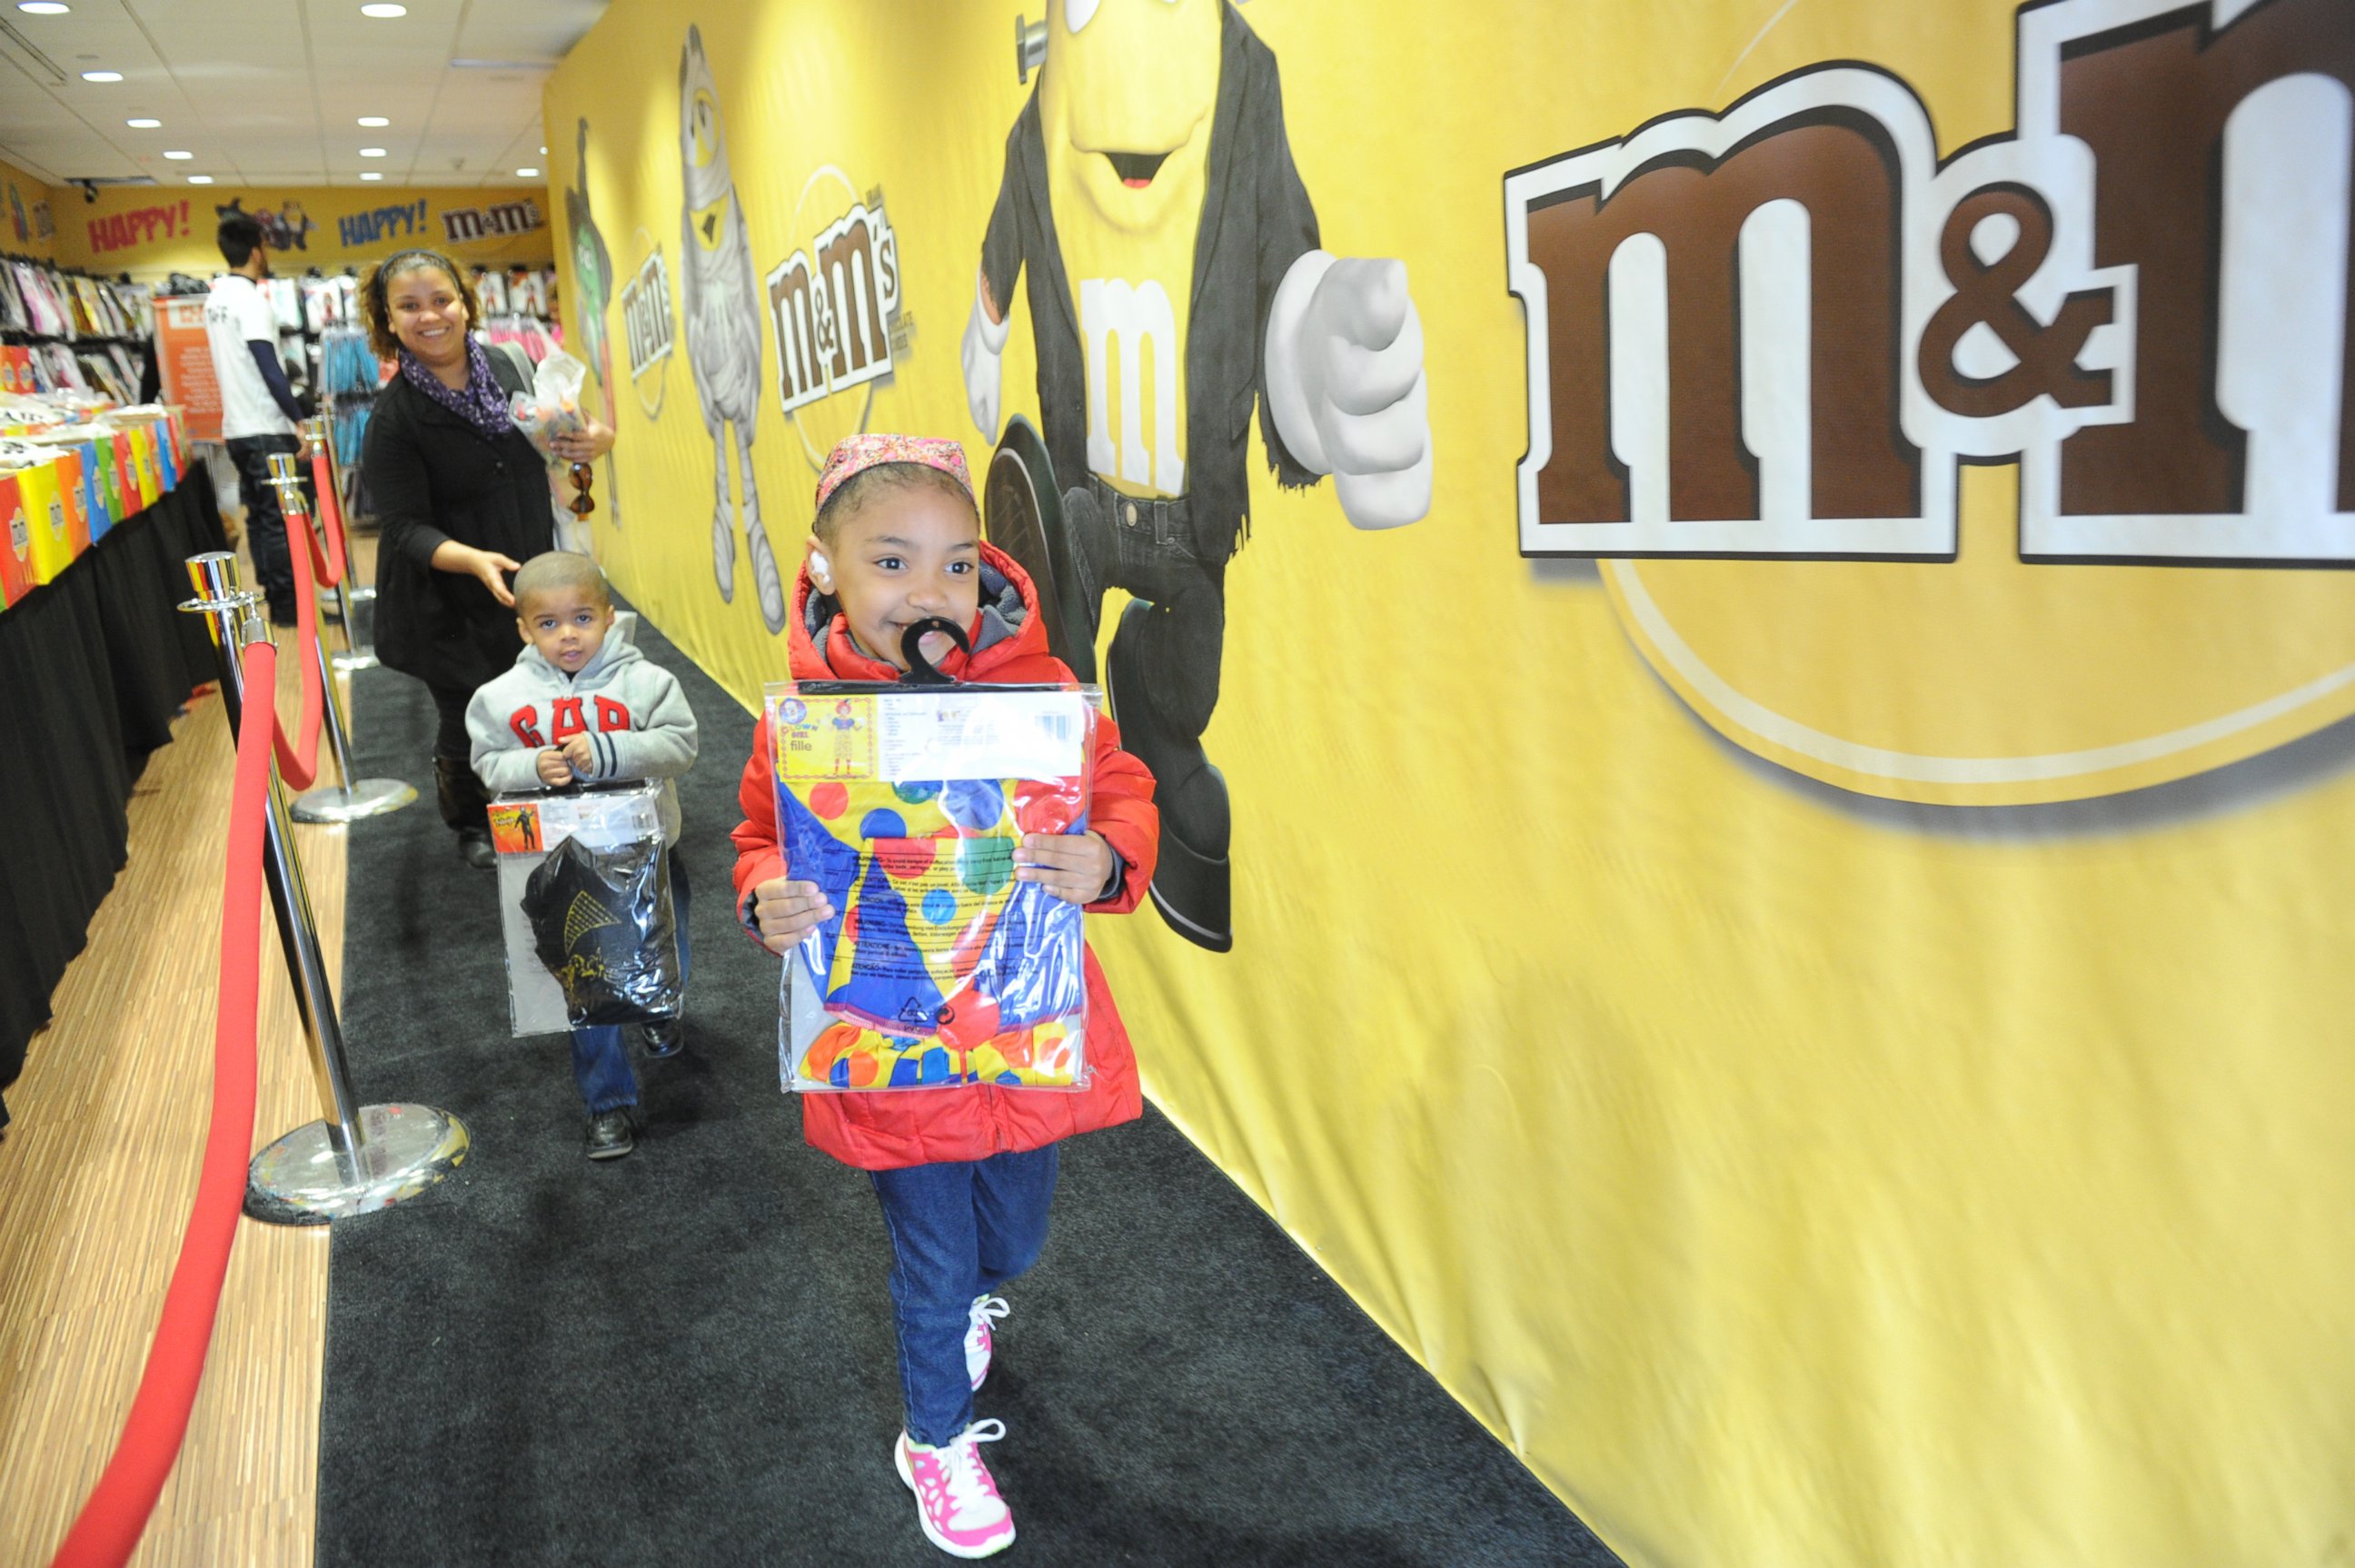 PHOTO: Families enjoyed M&M'S first-ever Halloween Pop-Up store in downtown Newark, N.J. where the brand gave away thousands of free costumes and candy to the community.